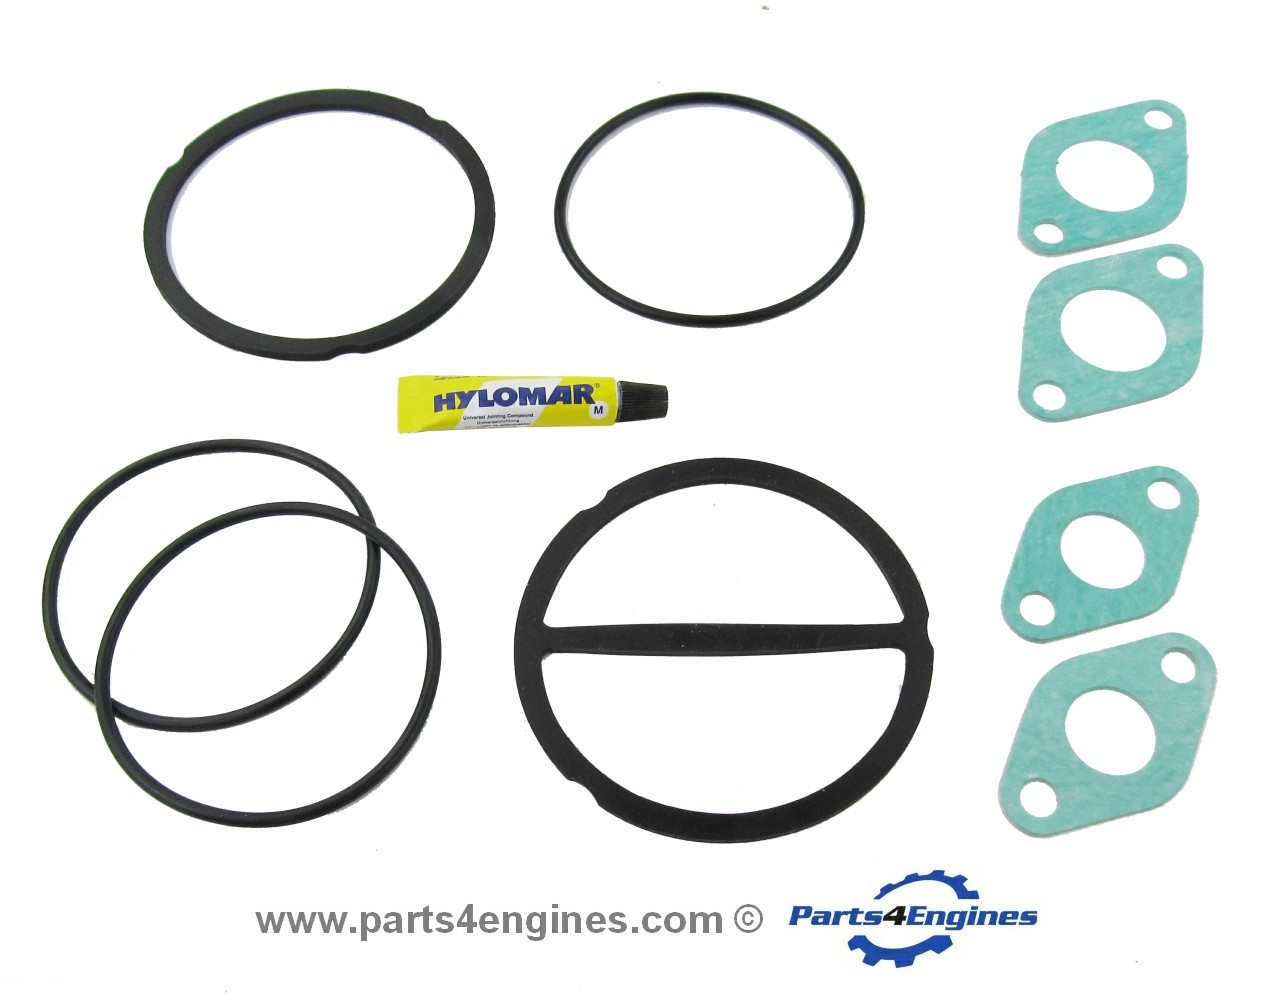 Later 'lowline' heat exchanger seals, from parts4engines.com